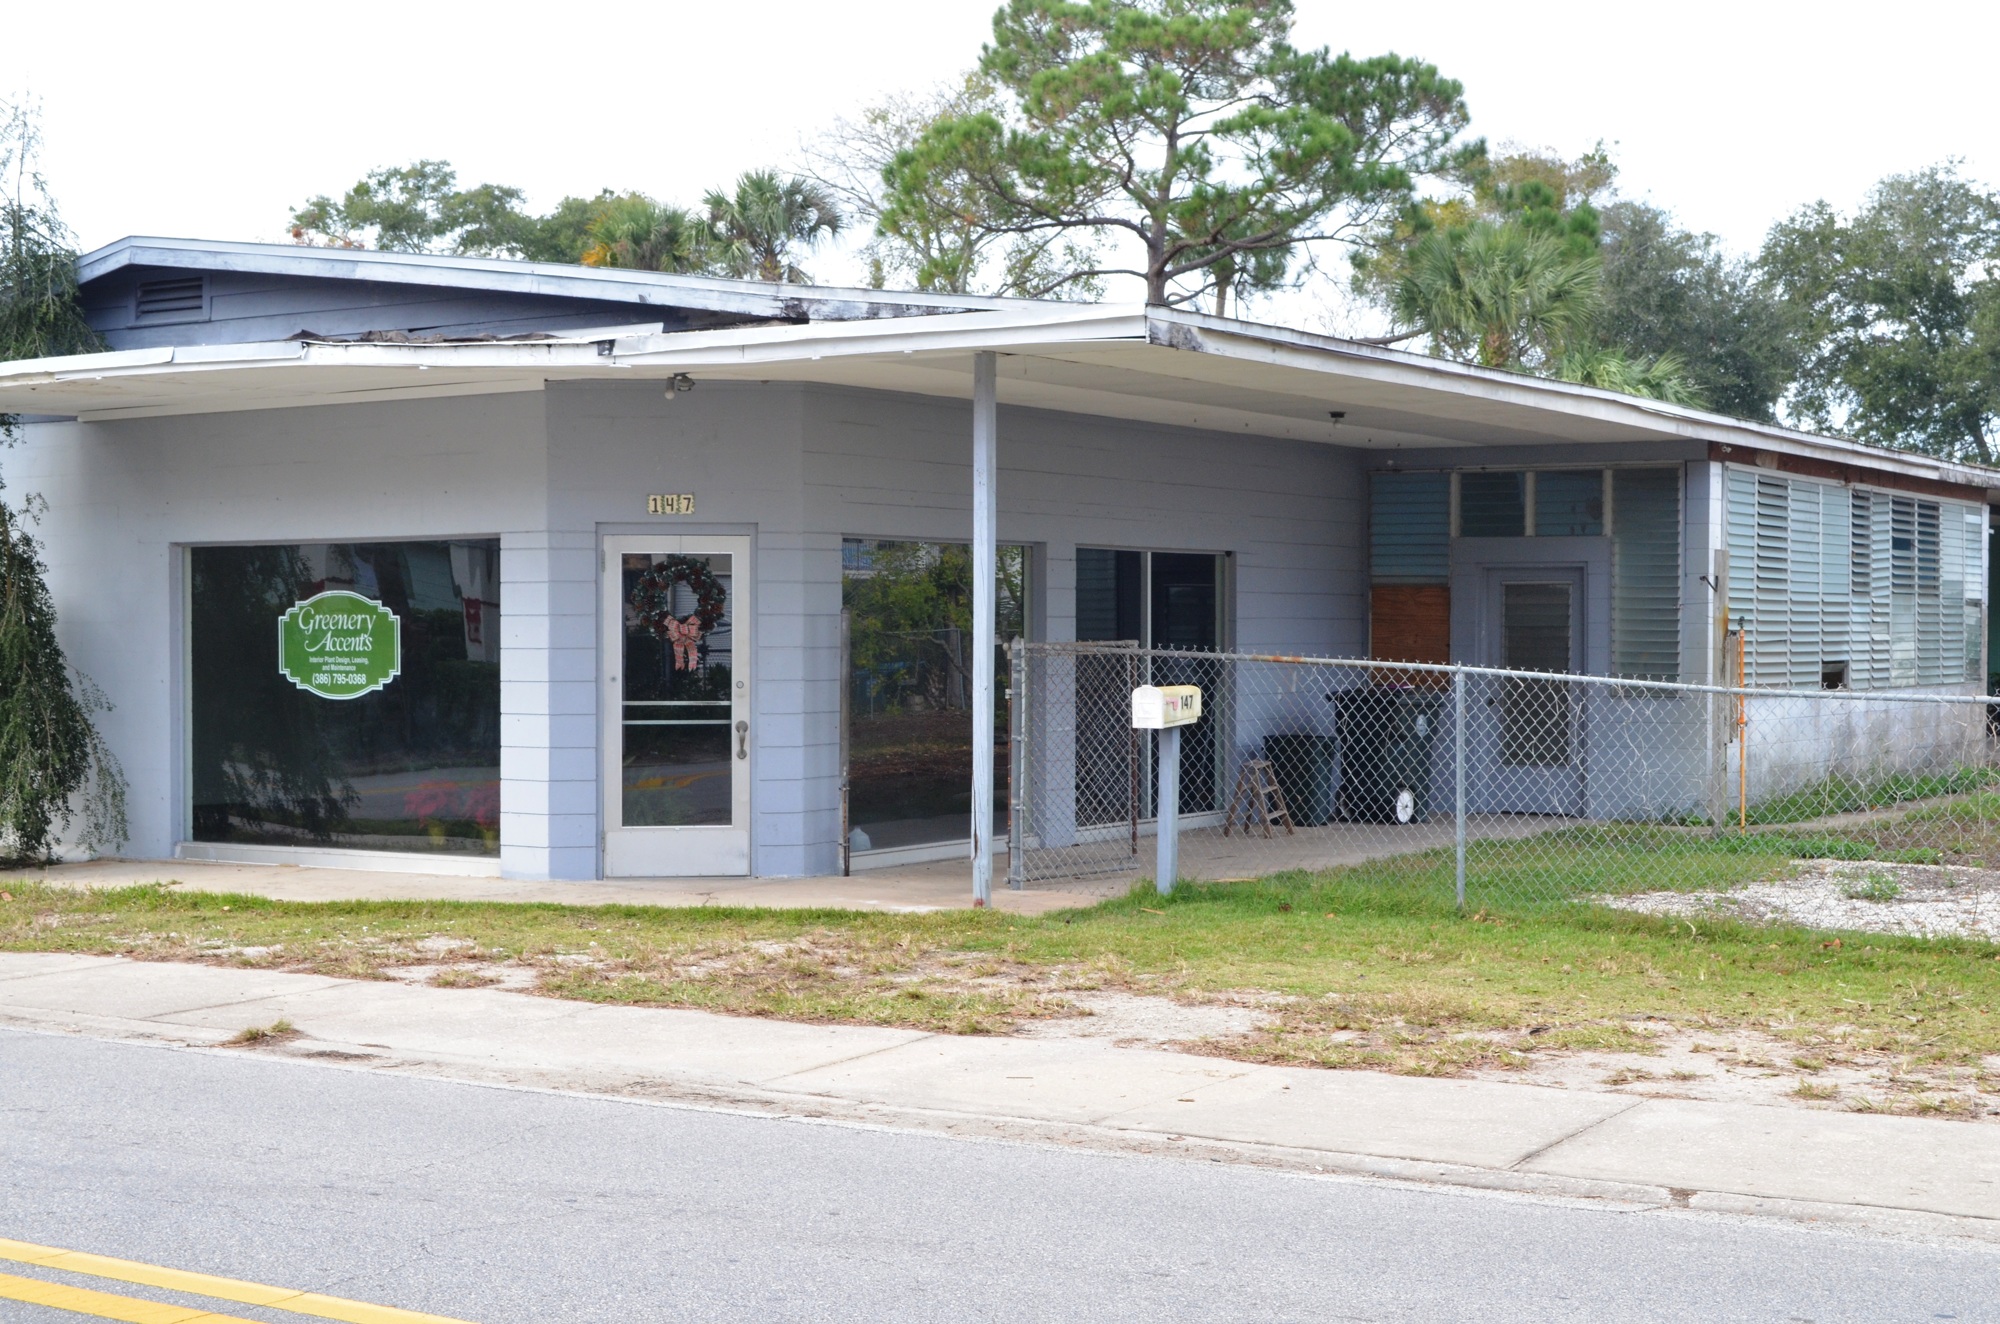 The exterior of the former garden center on Tomoka Avenue will be remodeled in the coming year. Photos by Wayne Grant